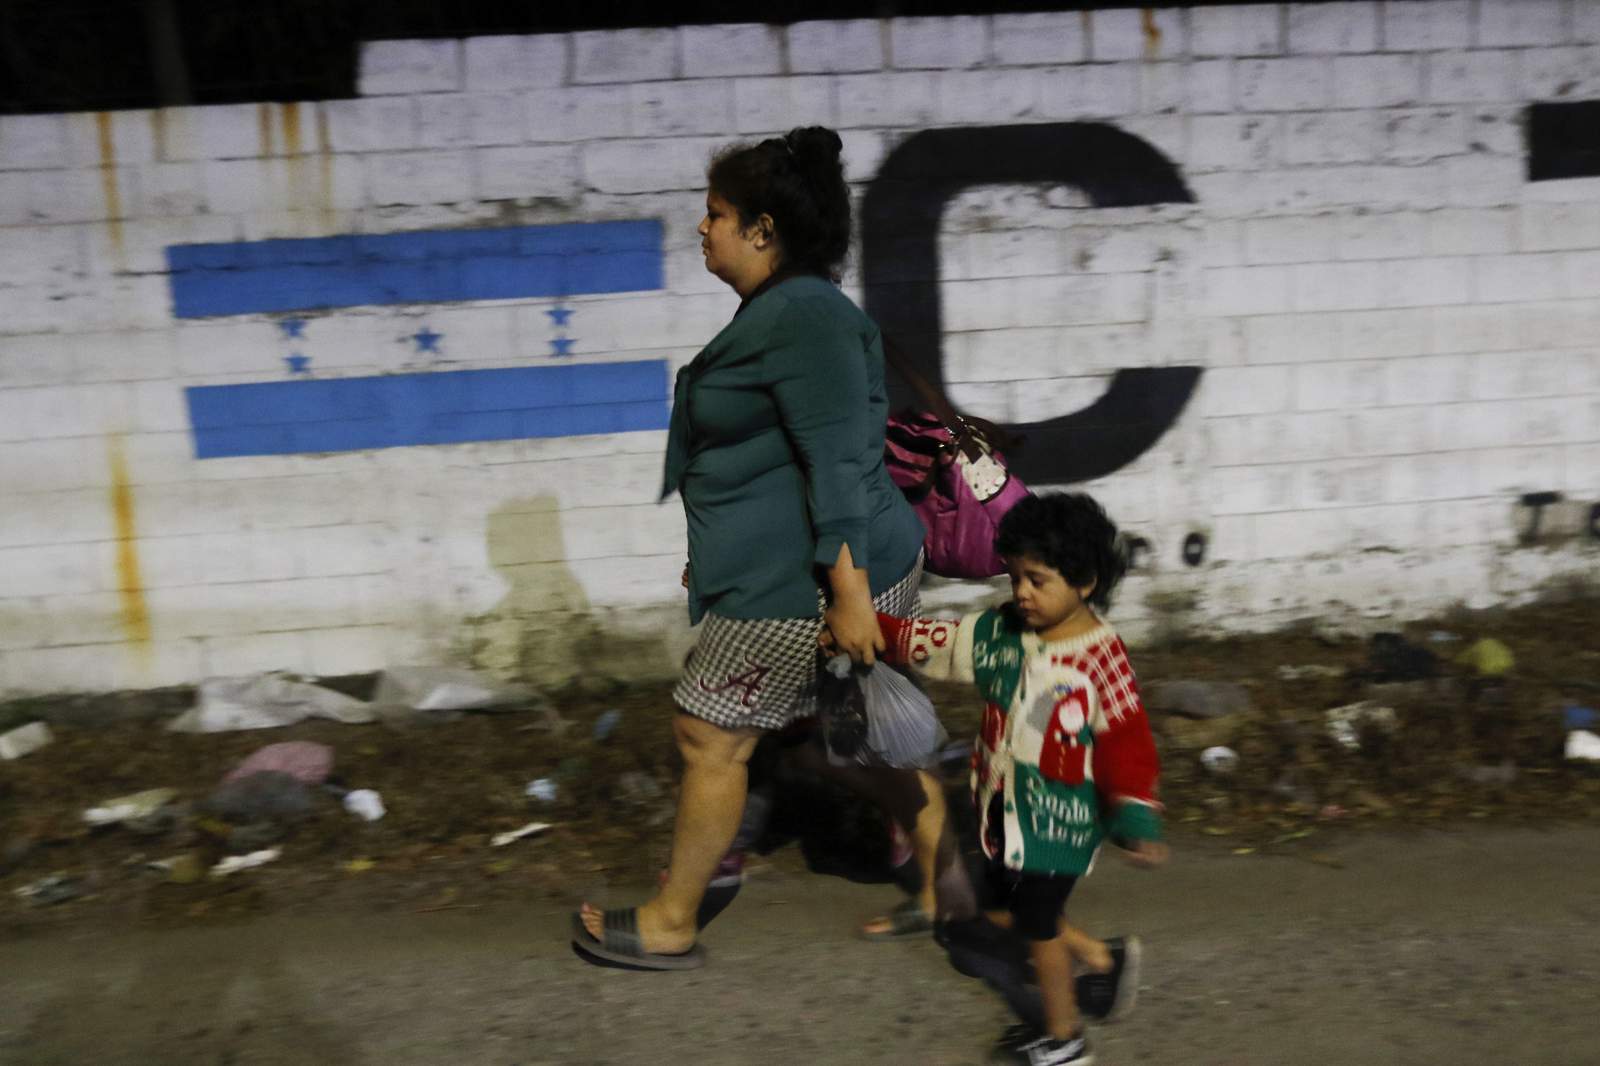 Hundreds of migrants set out from Honduras, dreaming of US